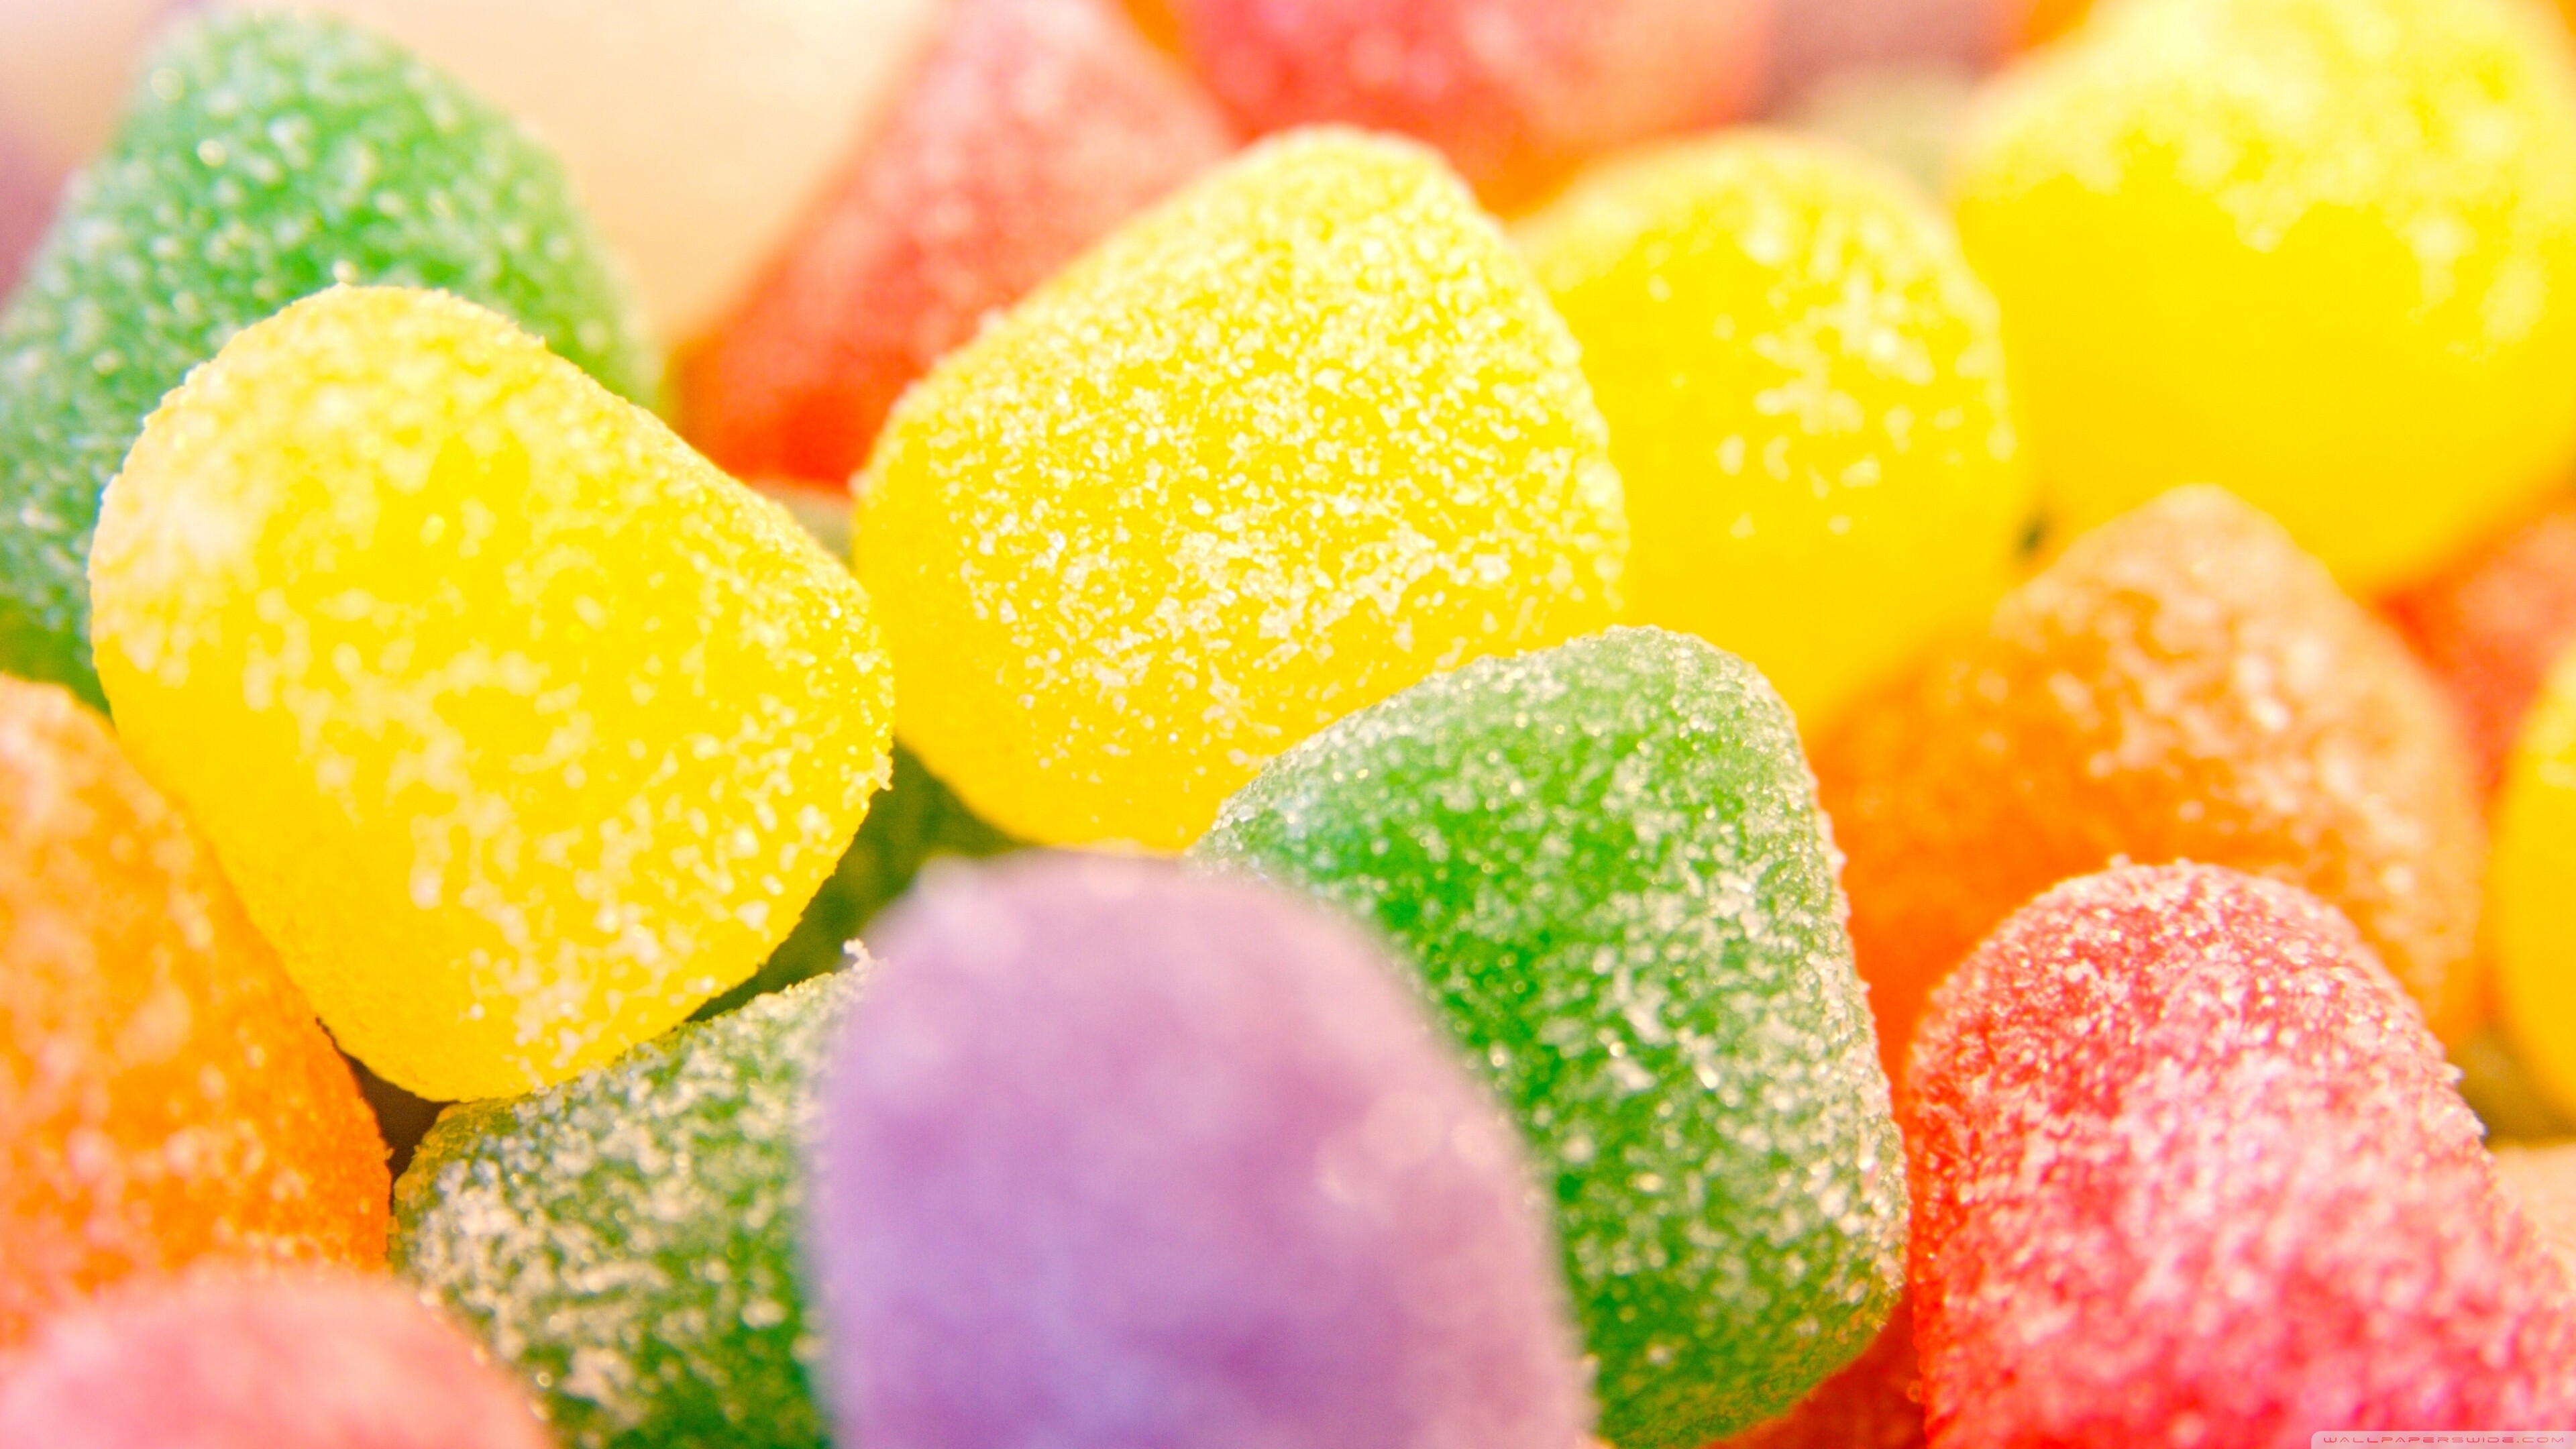 Sweets: Jellies, Small candies made with gelatin. 3840x2160 4K Wallpaper.